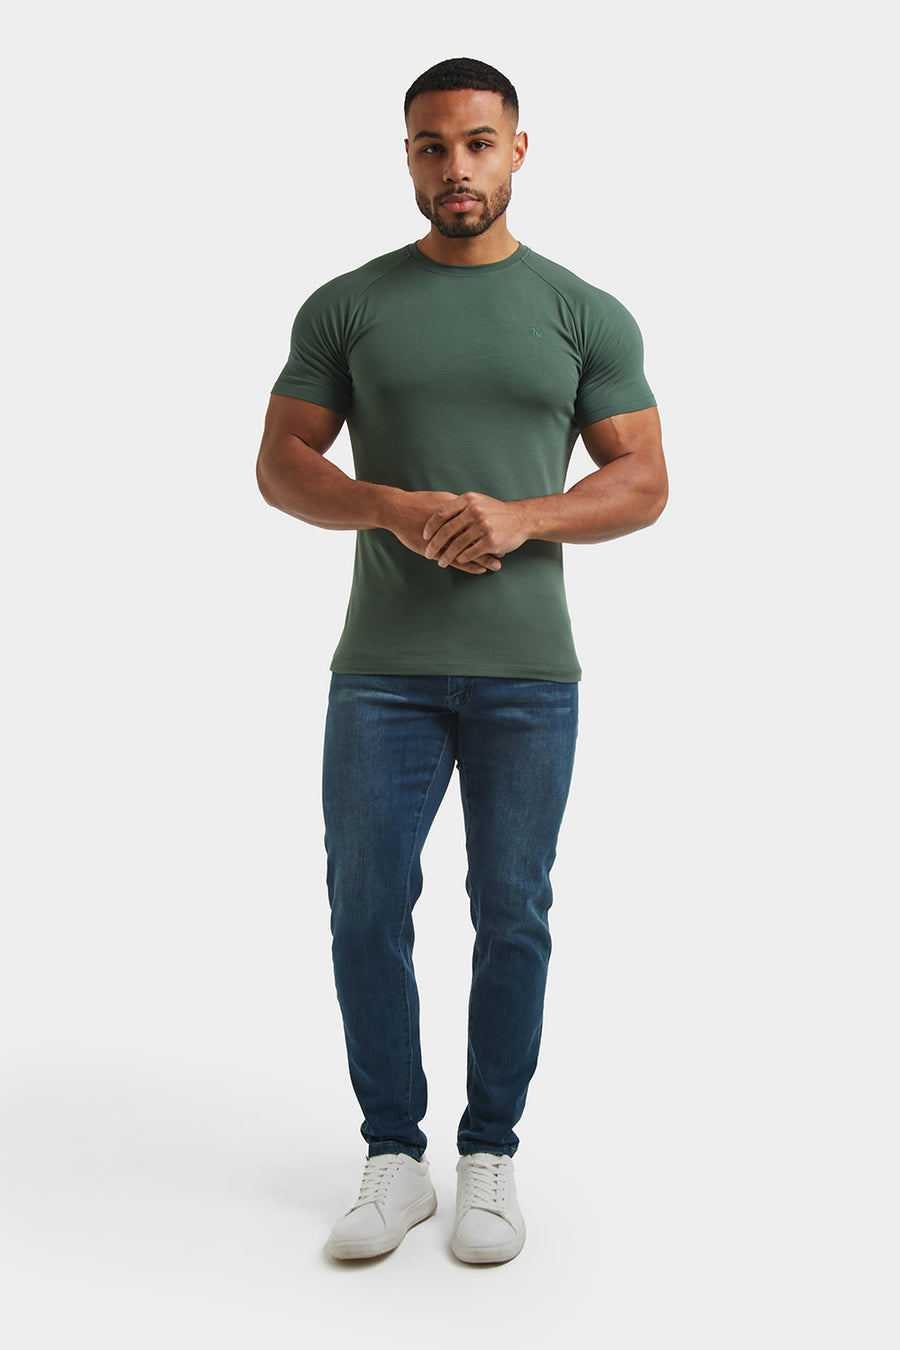 Athletic Fit T-Shirt in Dark Khaki - TAILORED ATHLETE - USA